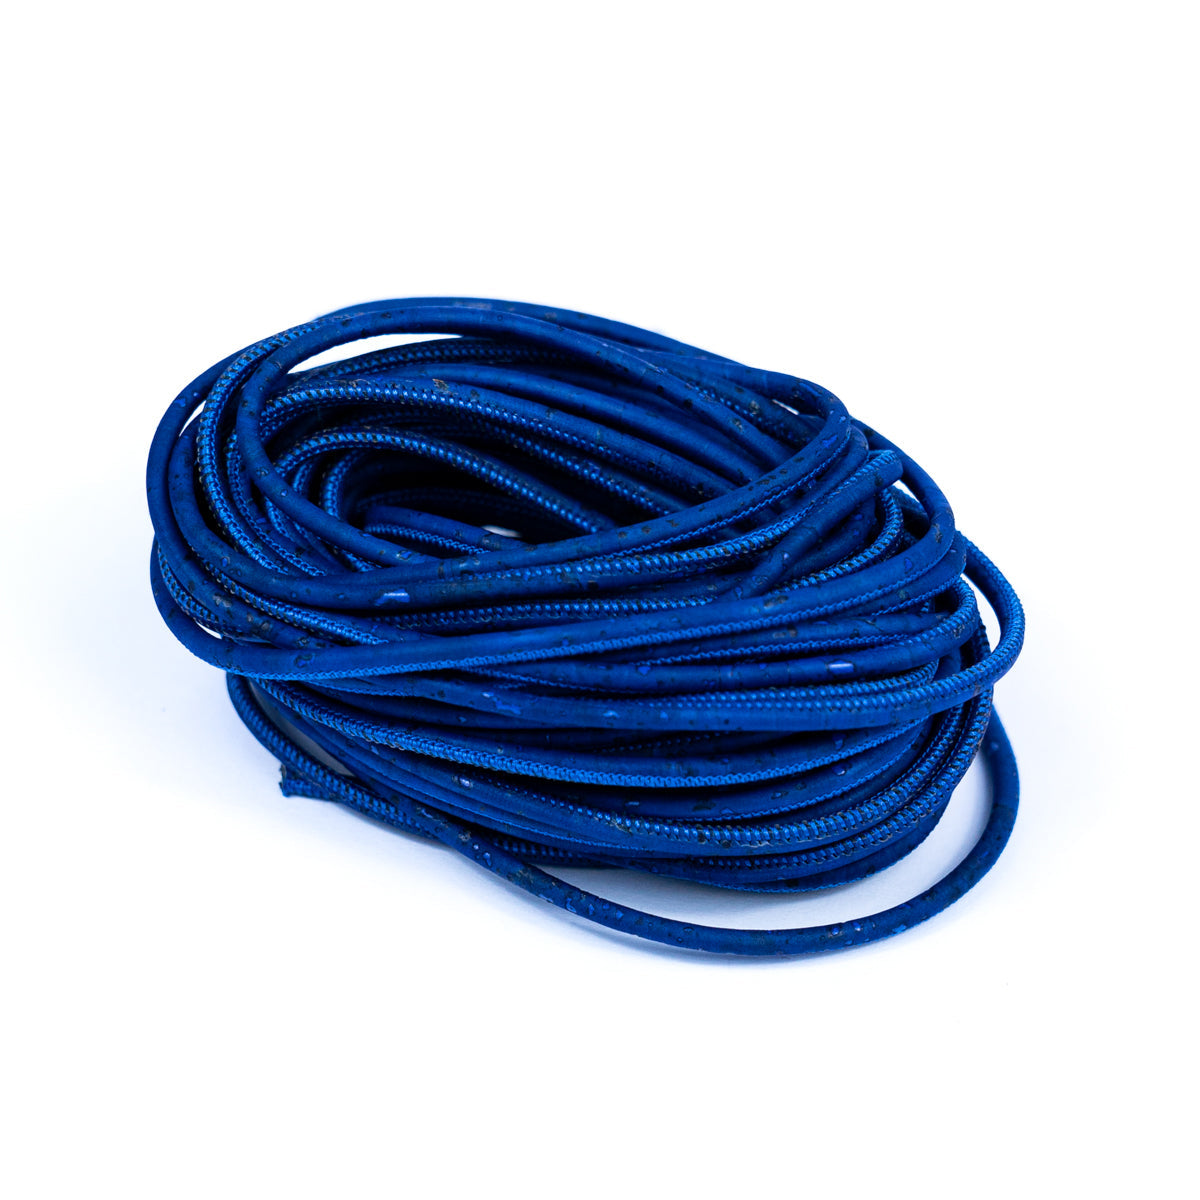 10 meters of 3MM Round Blue Cork Cord COR-631